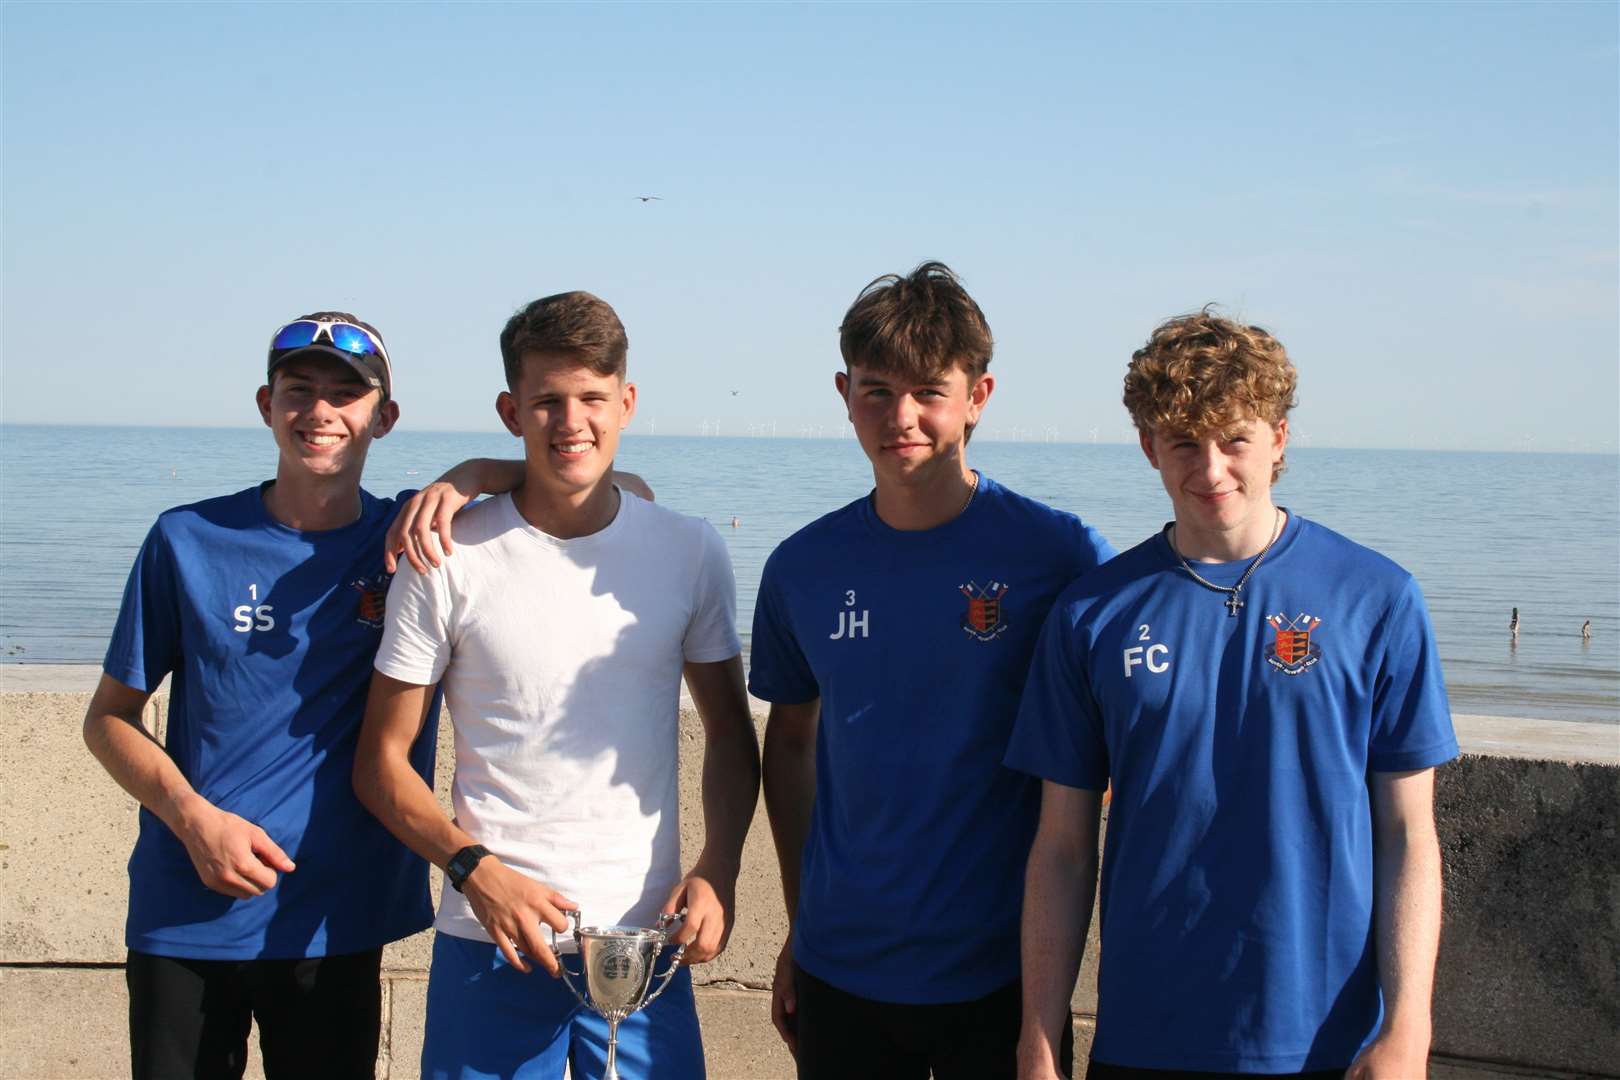 Dover's Sebastian Steele, Jasper Mallet, James Hale and Finn Cockerell, winners of the CARA Junior Fours and Pairs Championships